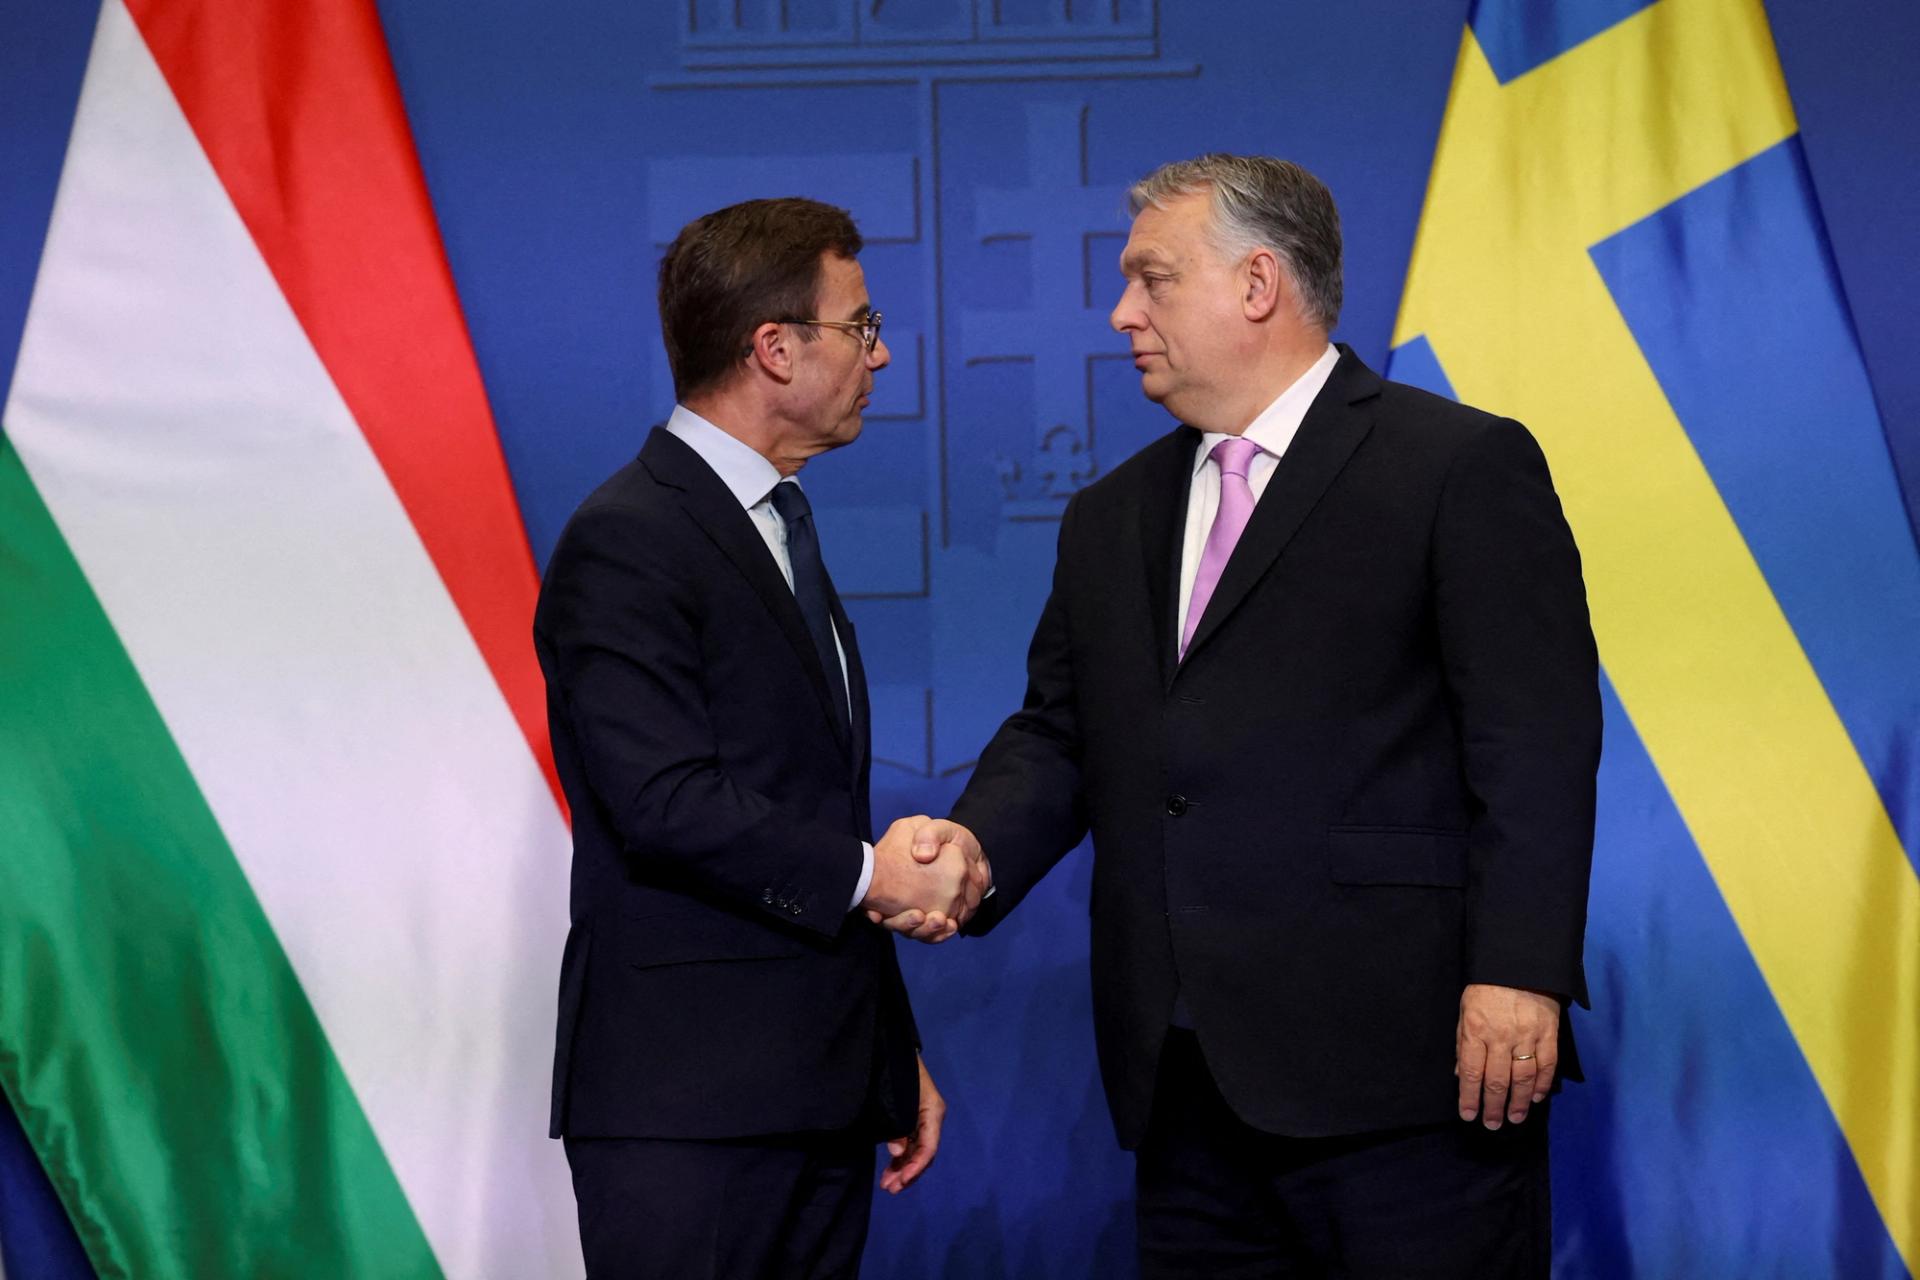 Swedish Prime Minister Ulf Kristersson and Hungarian Prime Minister Viktor Orban shake hands at a joint press conference in Budapest, Hungary, February 23, 2024. REUTERS/Bernadett Szabo